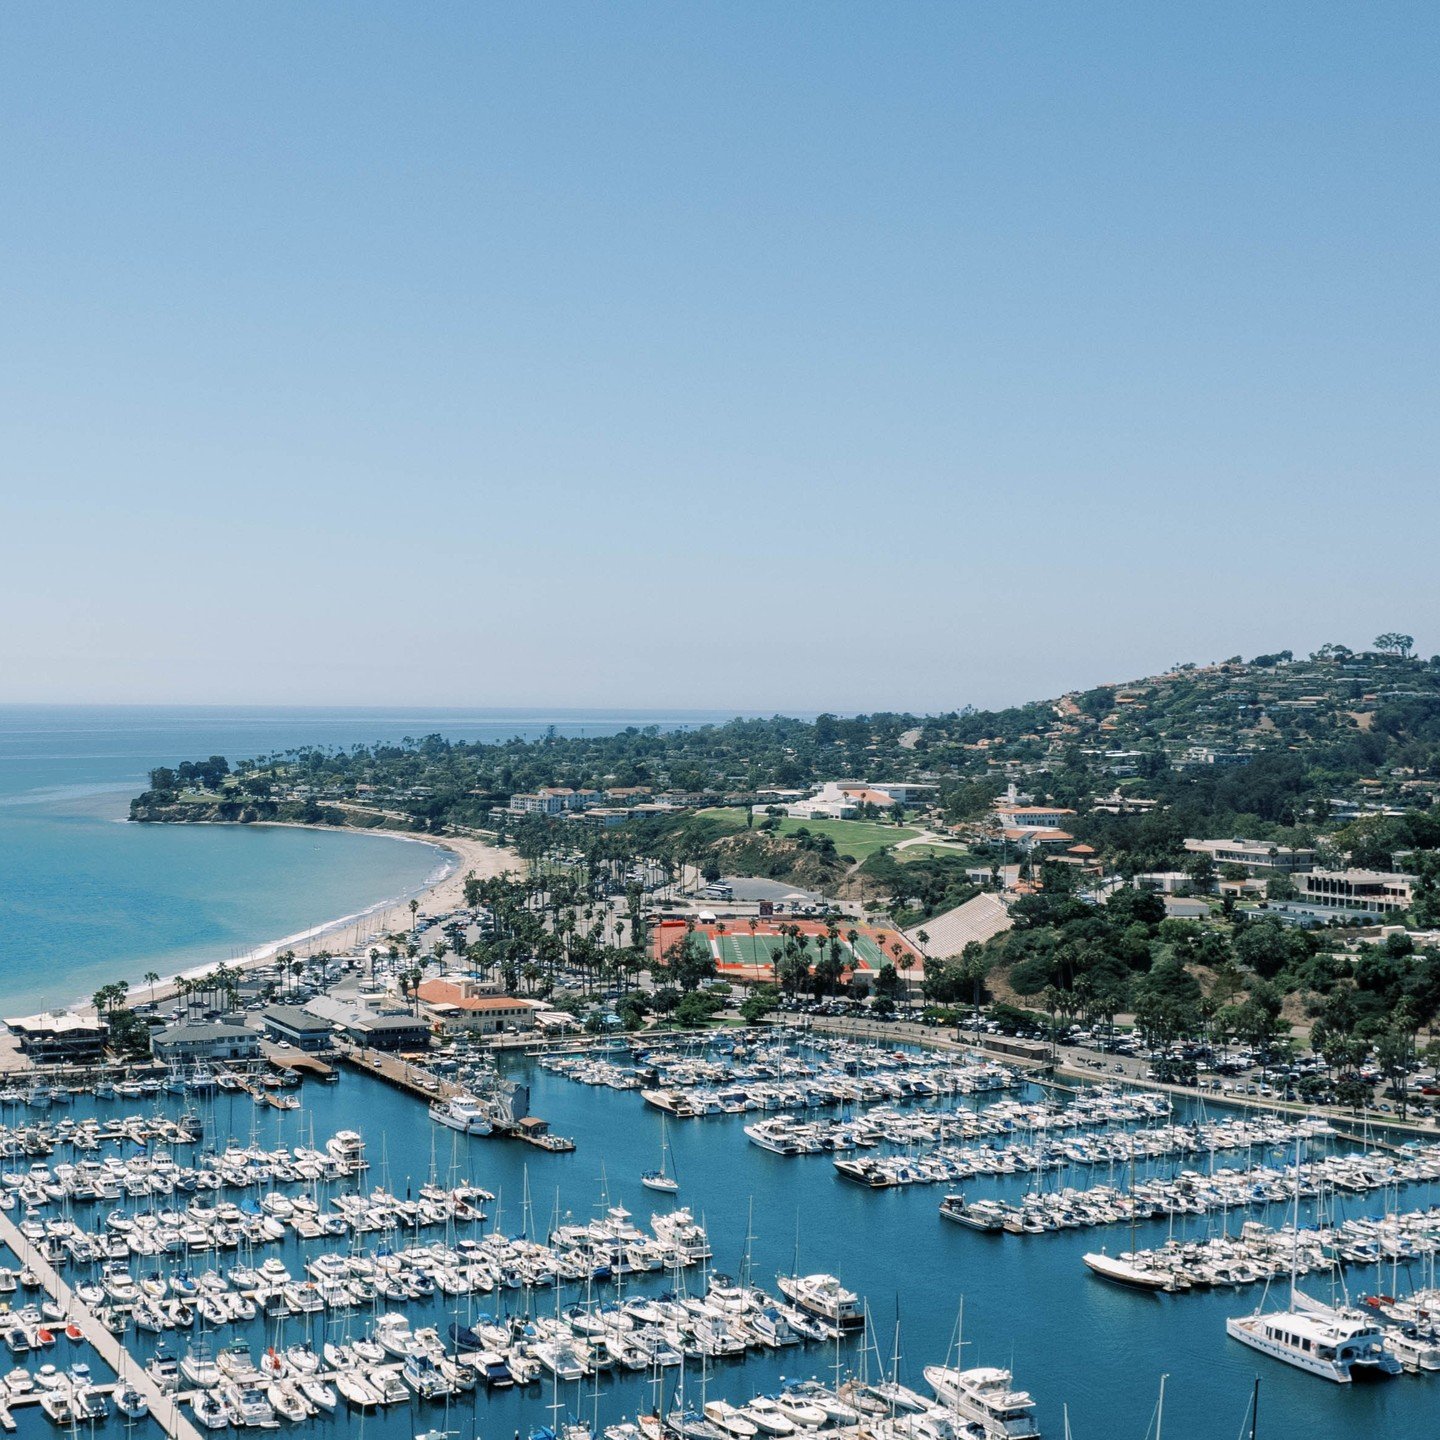 www.santabarbarawedding.com | Santa Barbara City College | View of the College Campus and Marina from Above